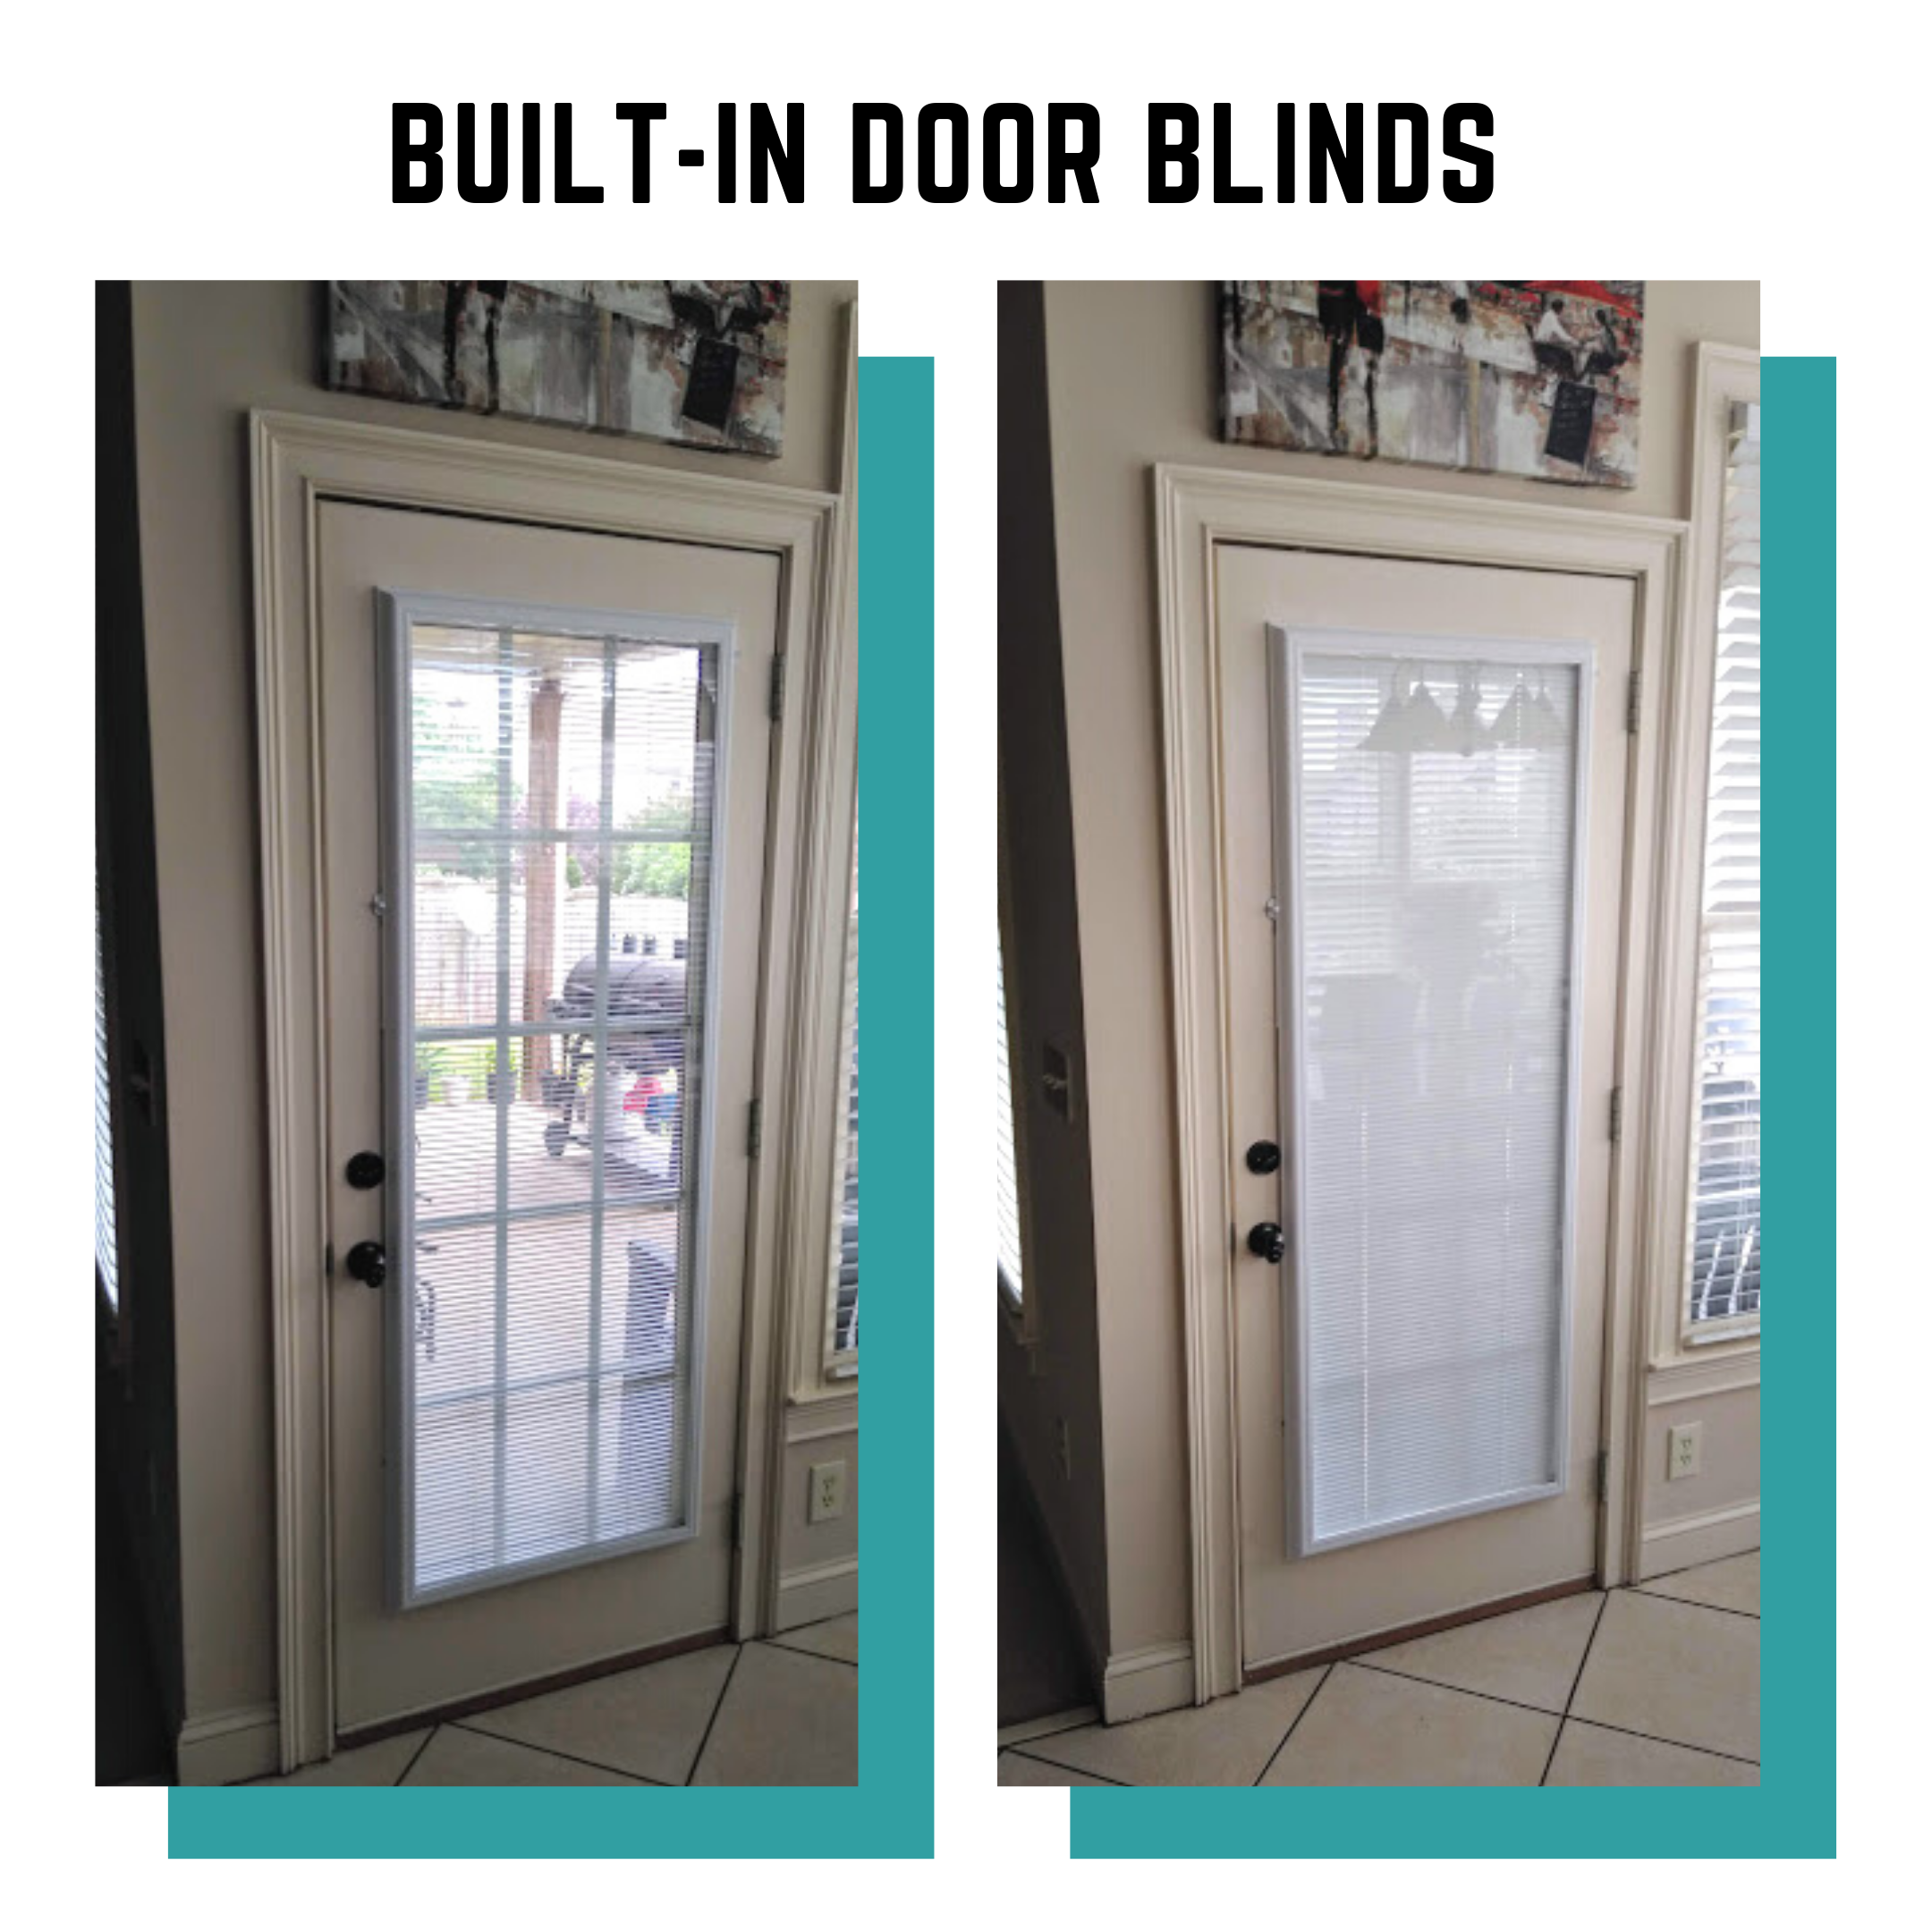 Builtin door blinds: Whatever our customers need, we provide. This customer wanted something that would have a small projection from the door and not move whenever the door opened. They also wanted to maintain ability to tilt open or closed. The solution is these cased in blinds